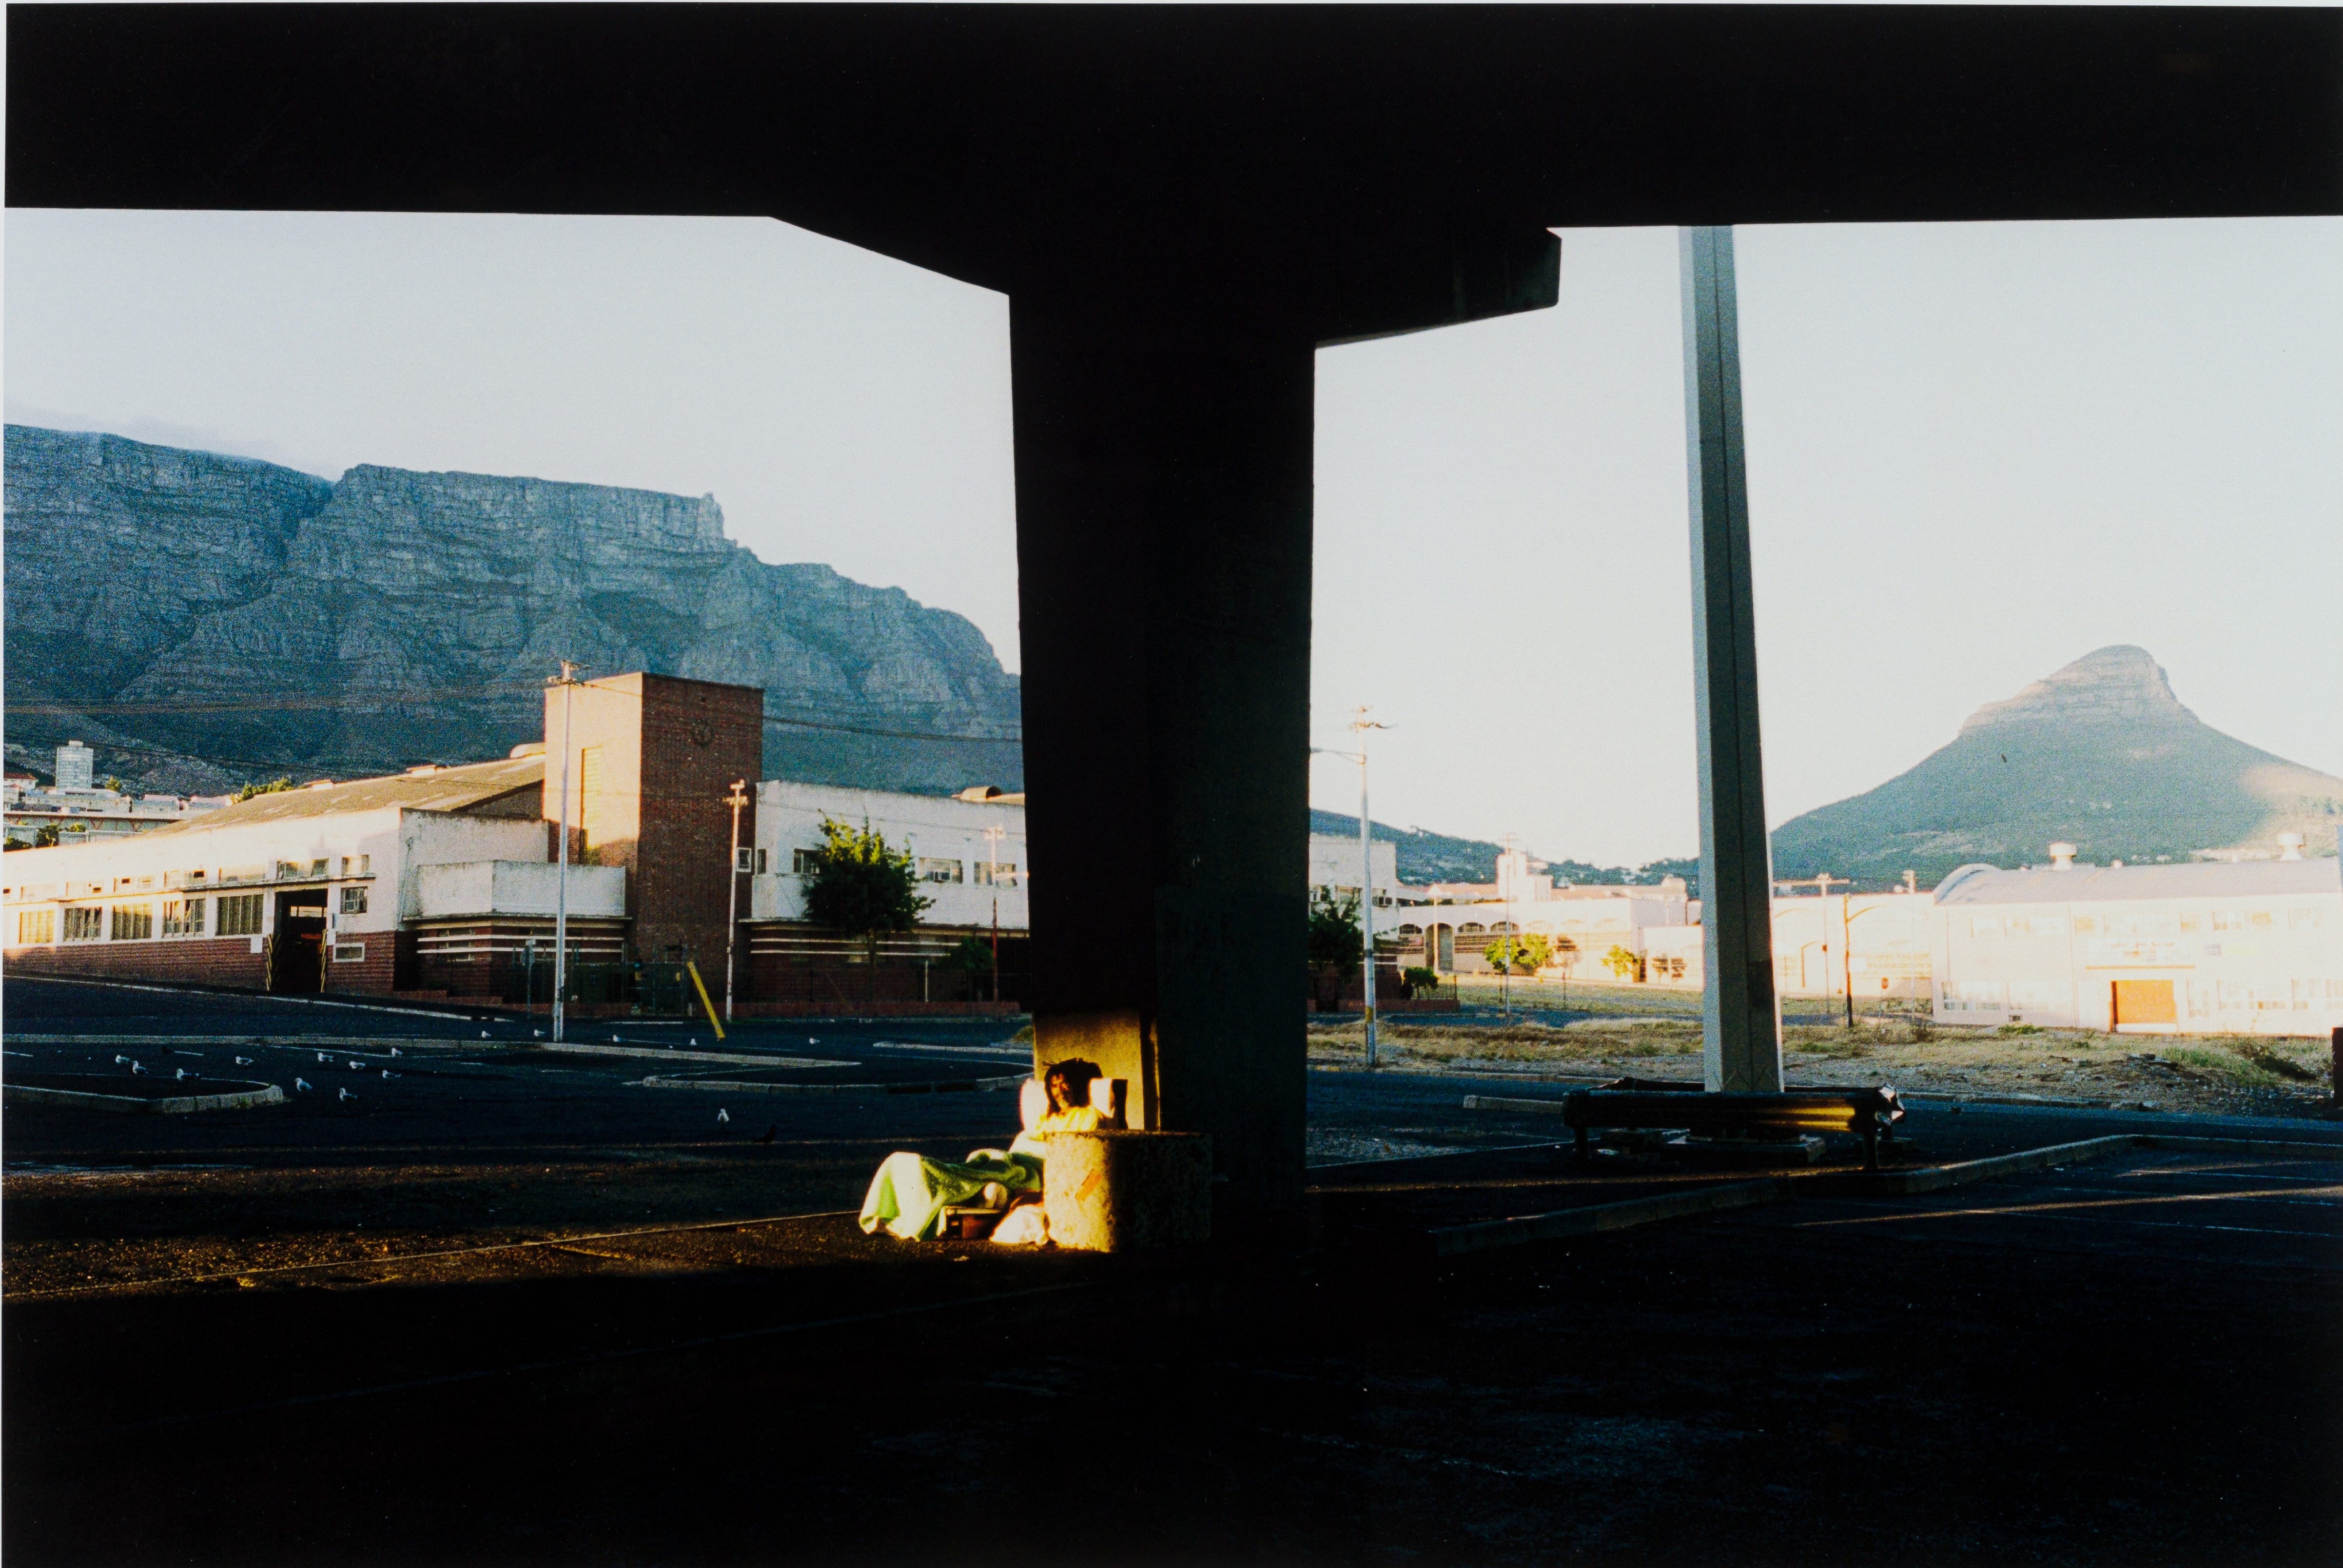 Joe, Cape Town Foreshore by Mikhael Subotzky, dated 2005